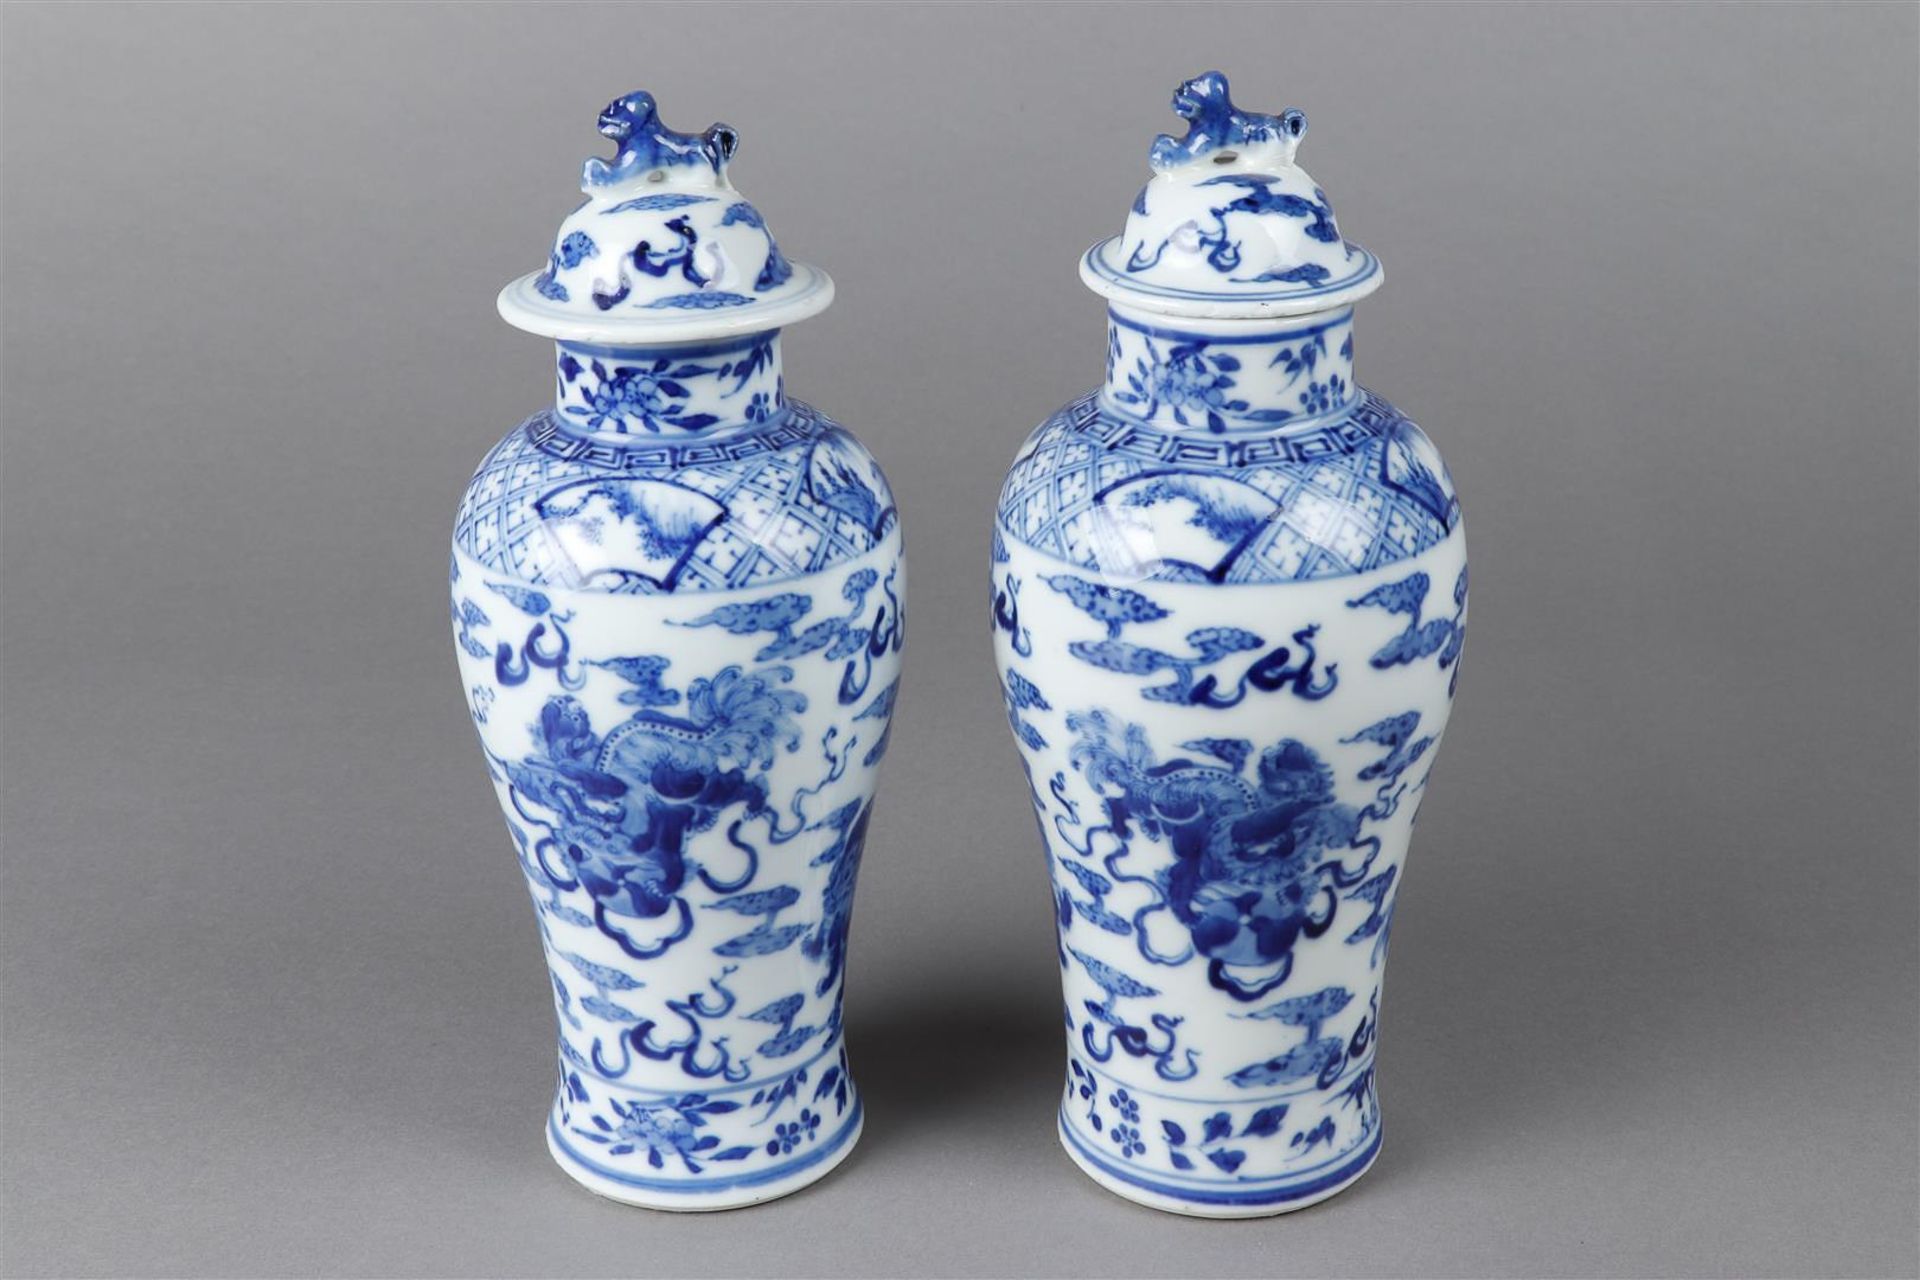 A set of two porcelain lidded vases decorated with dragons, marked Kangxi. China, 19th century.